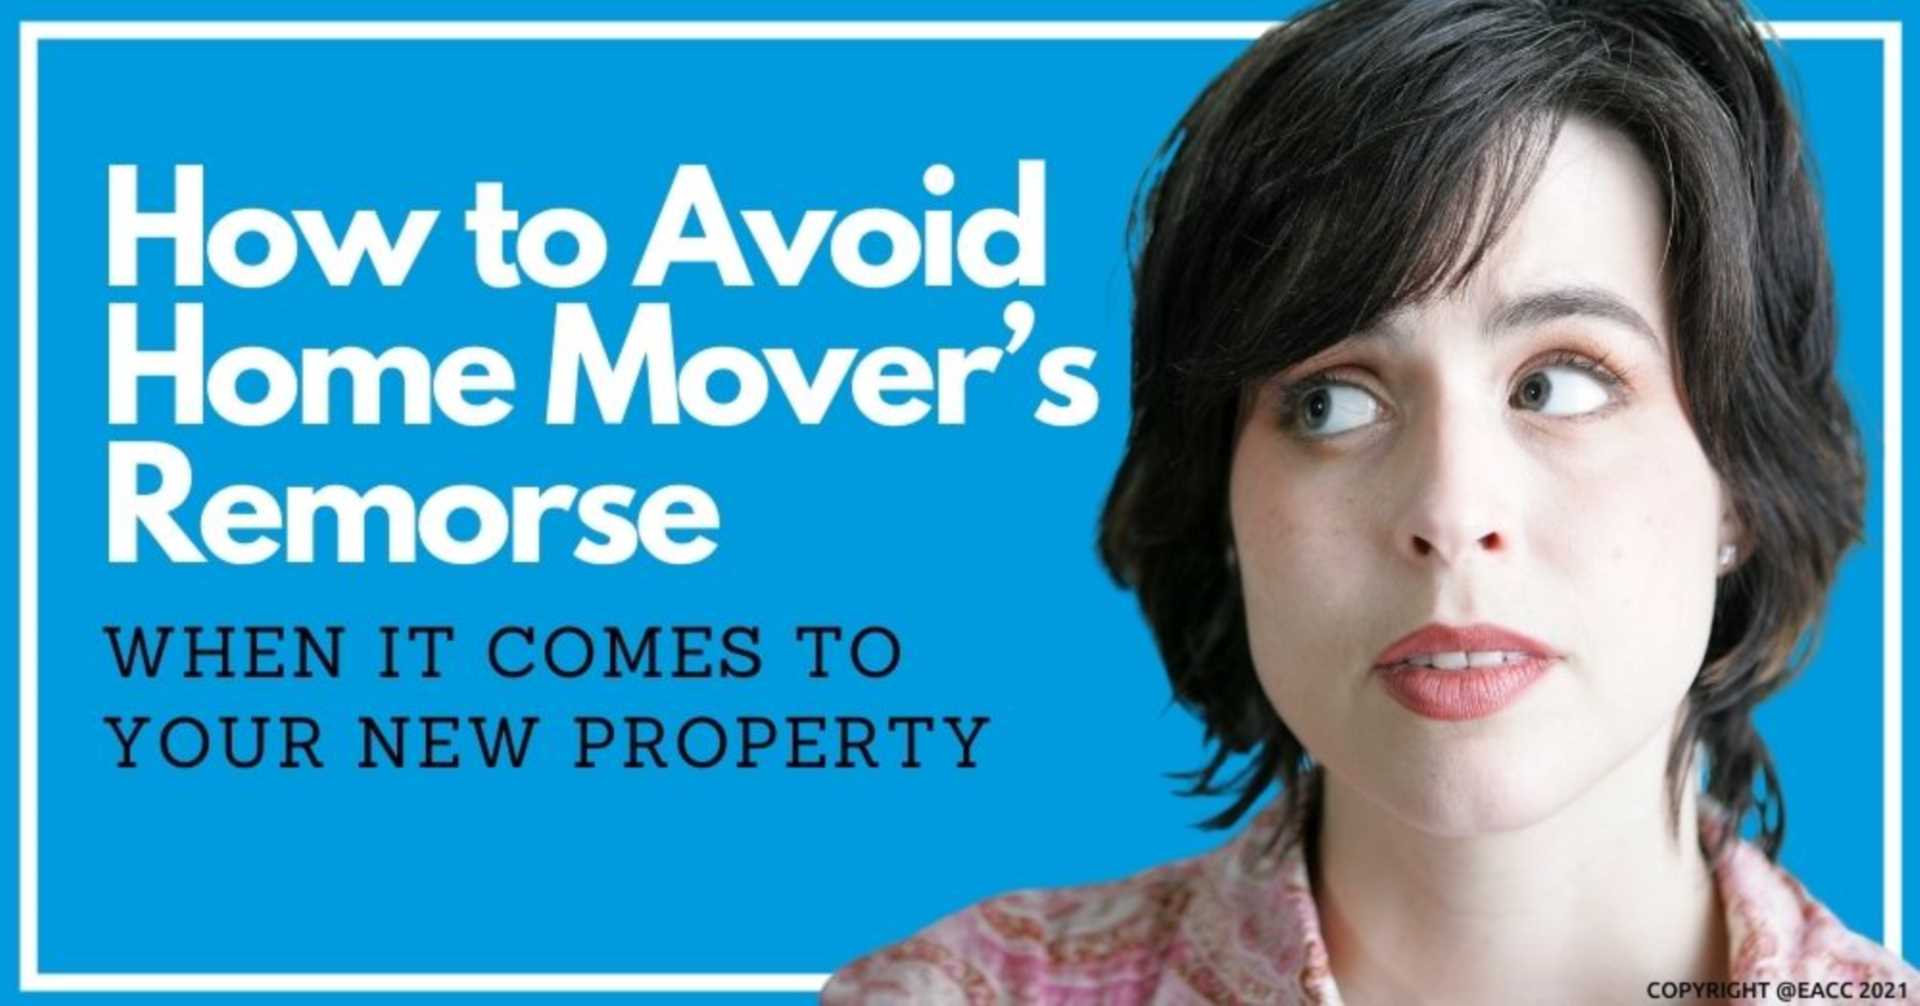 Nine Simple Ways to Remove Remorse from Your New Home